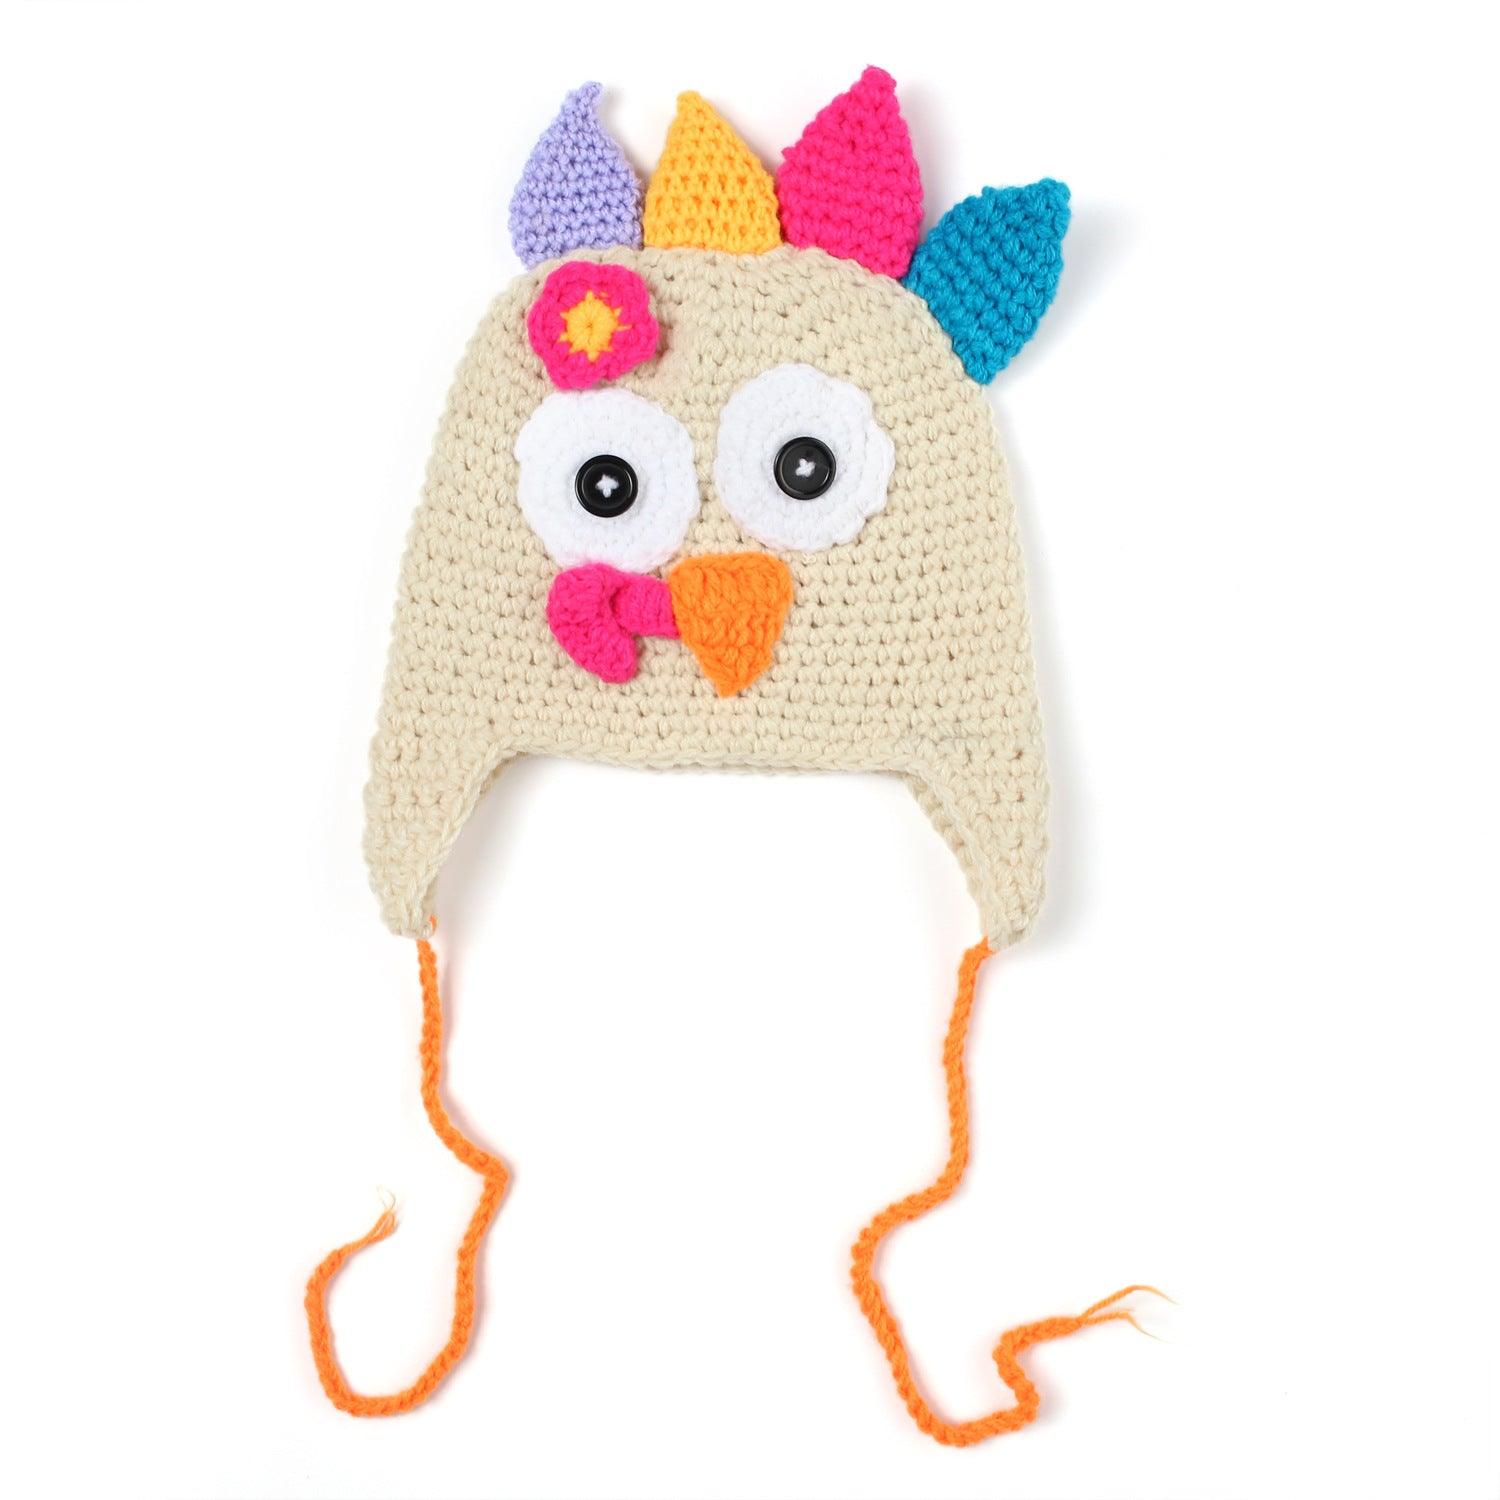 Thanksgiving hand-woven turkey hat Kids product